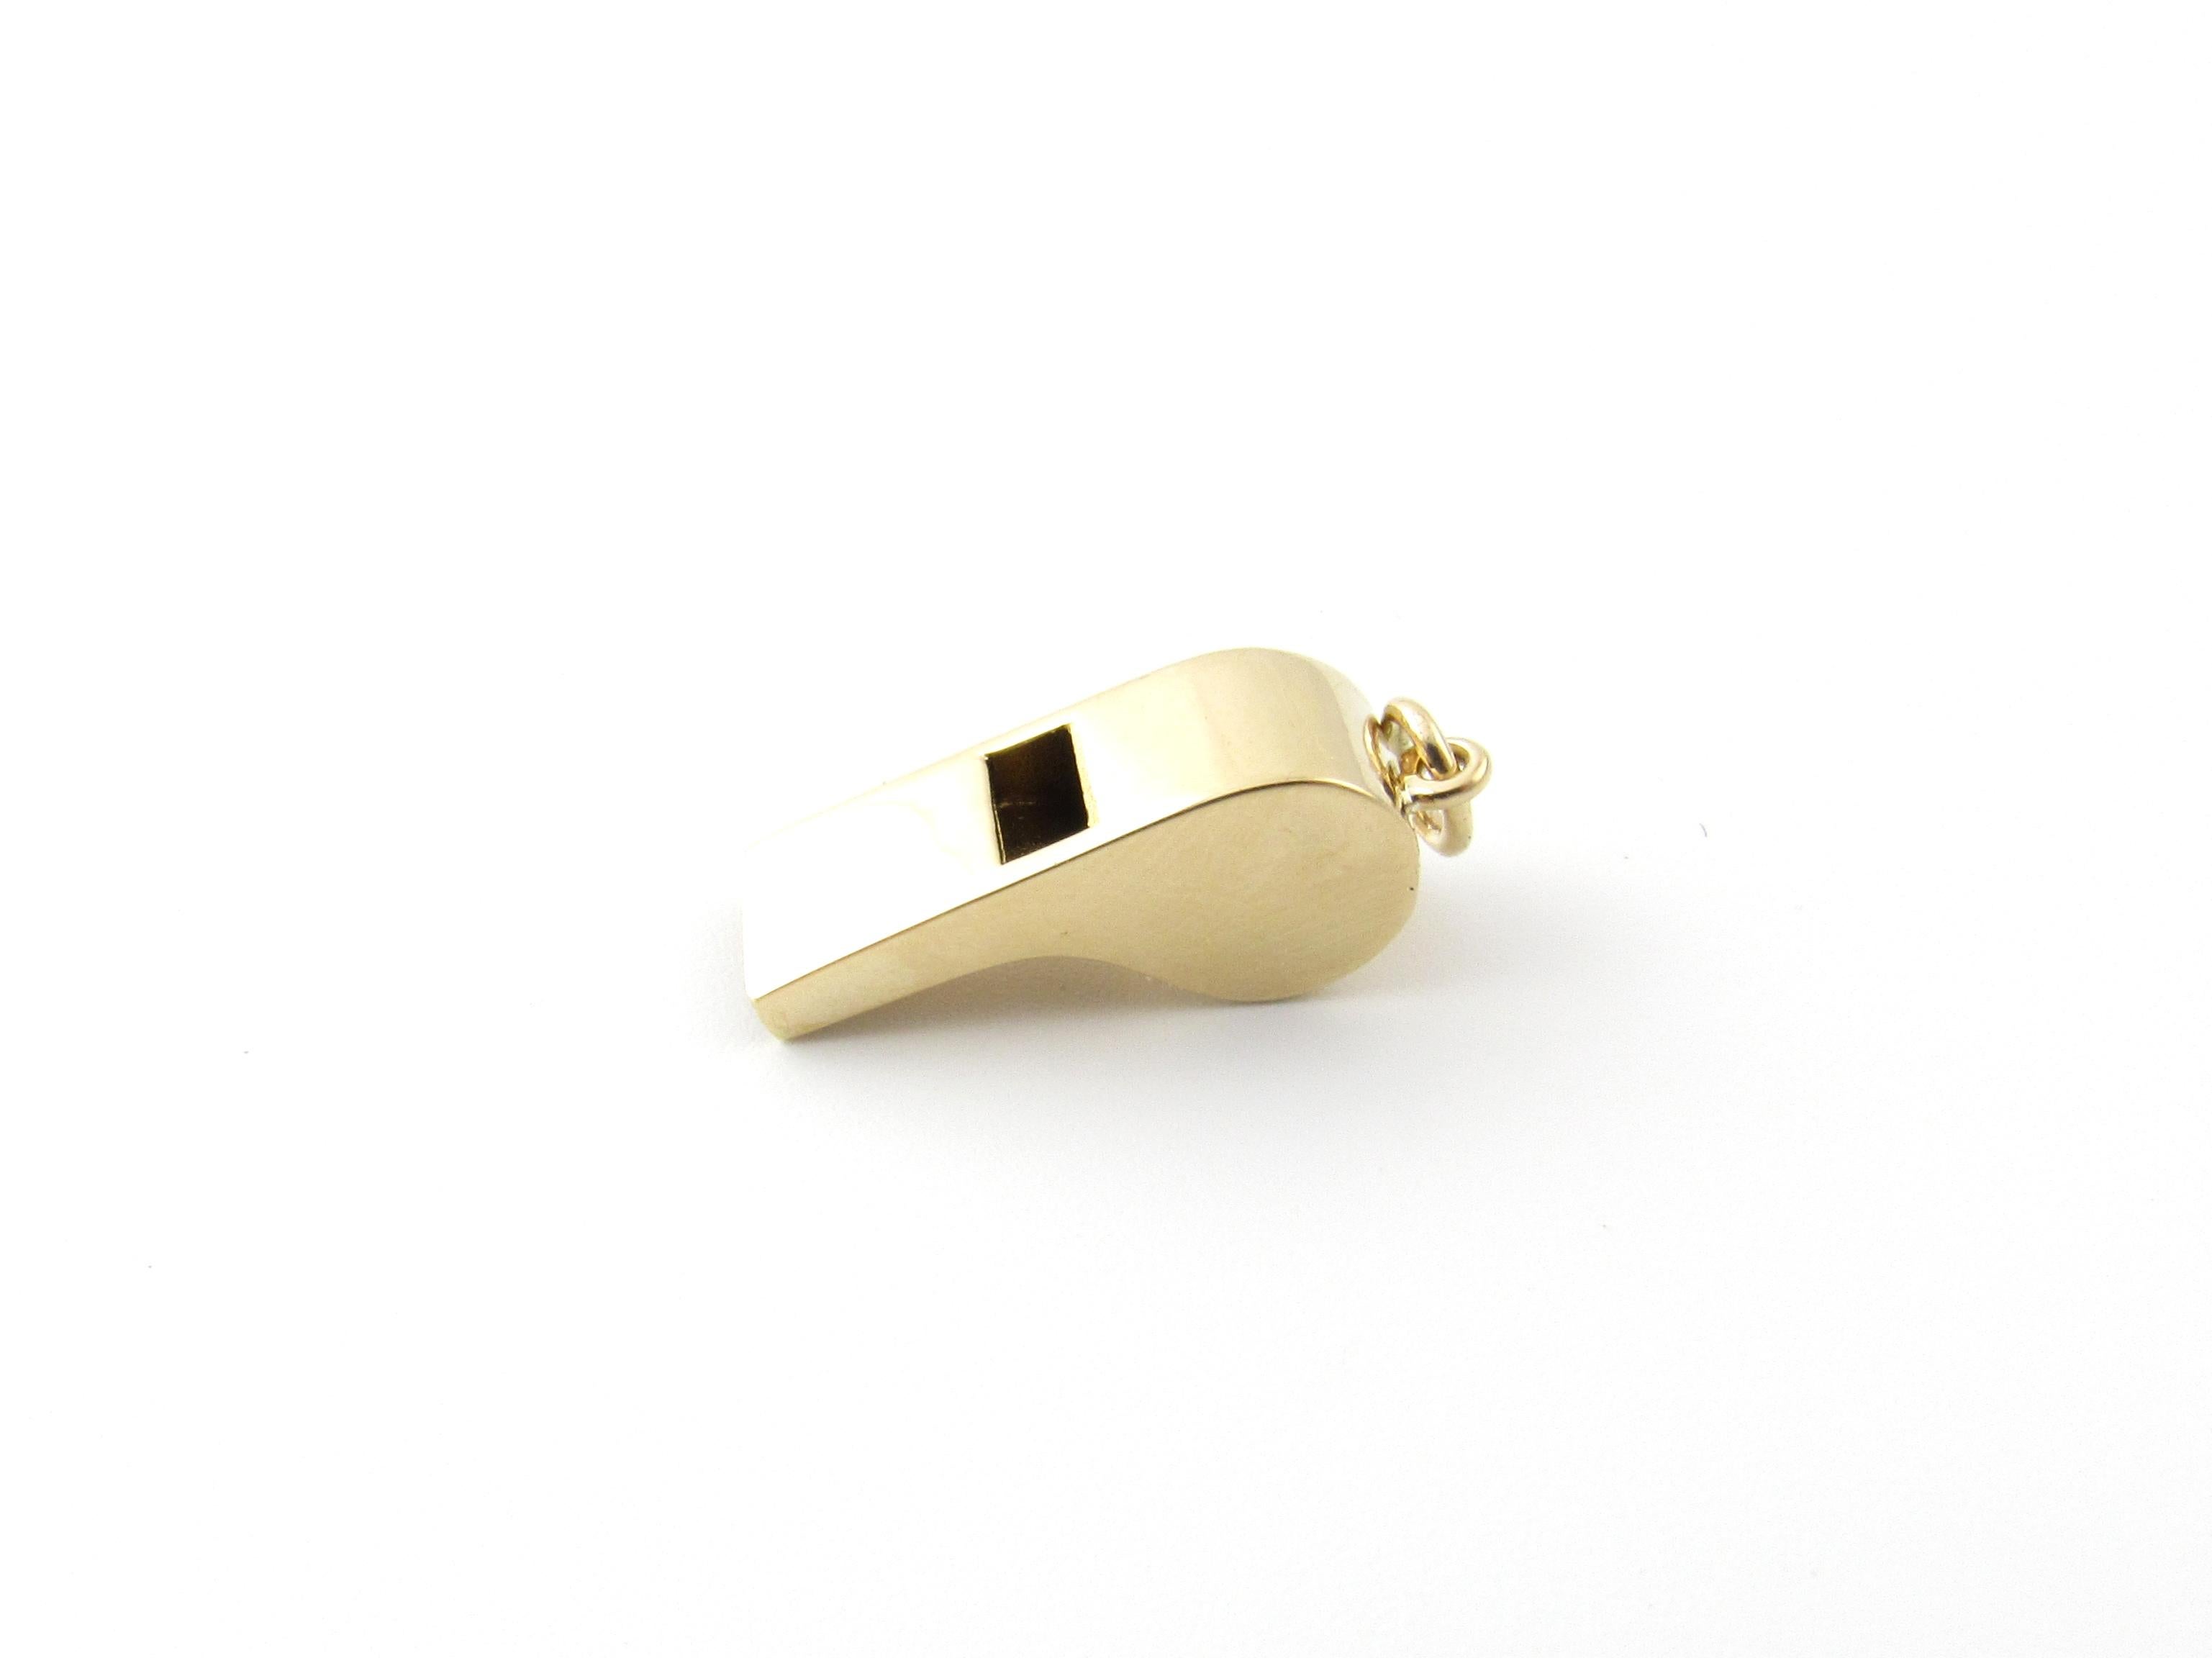 Vintage 14 Karat Yellow Gold Whistle Charm

This lovely 3D charm features a working whistle meticulously detailed in 14K yellow gold.

Size: 20 mm x 7 mm

Weight: 1.4 dwt. / 2.3 gr.

Stamped: 14K

Very good condition, professionally polished. Will